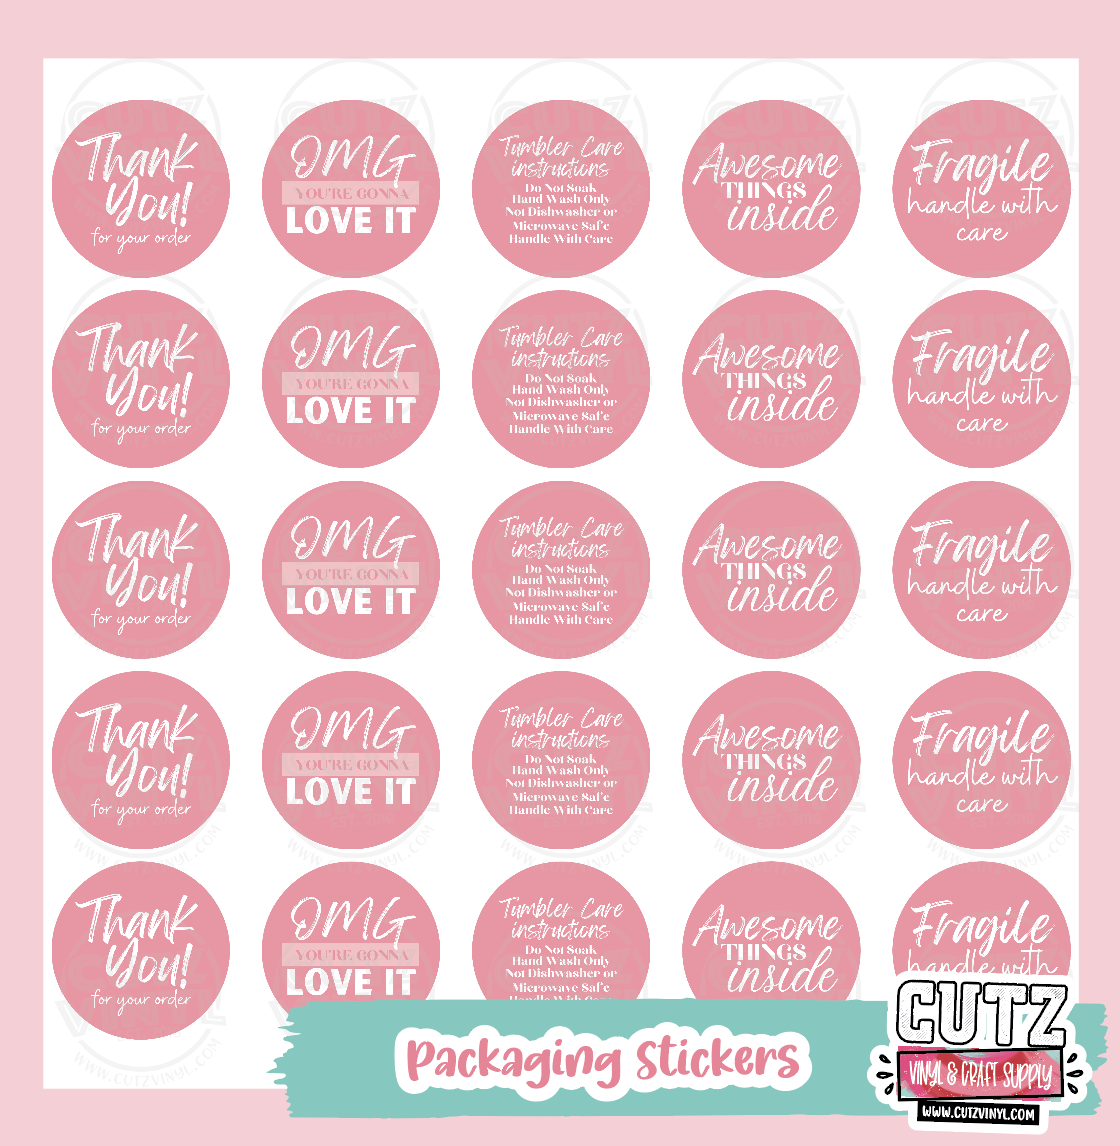 Pink Packaging Stickers